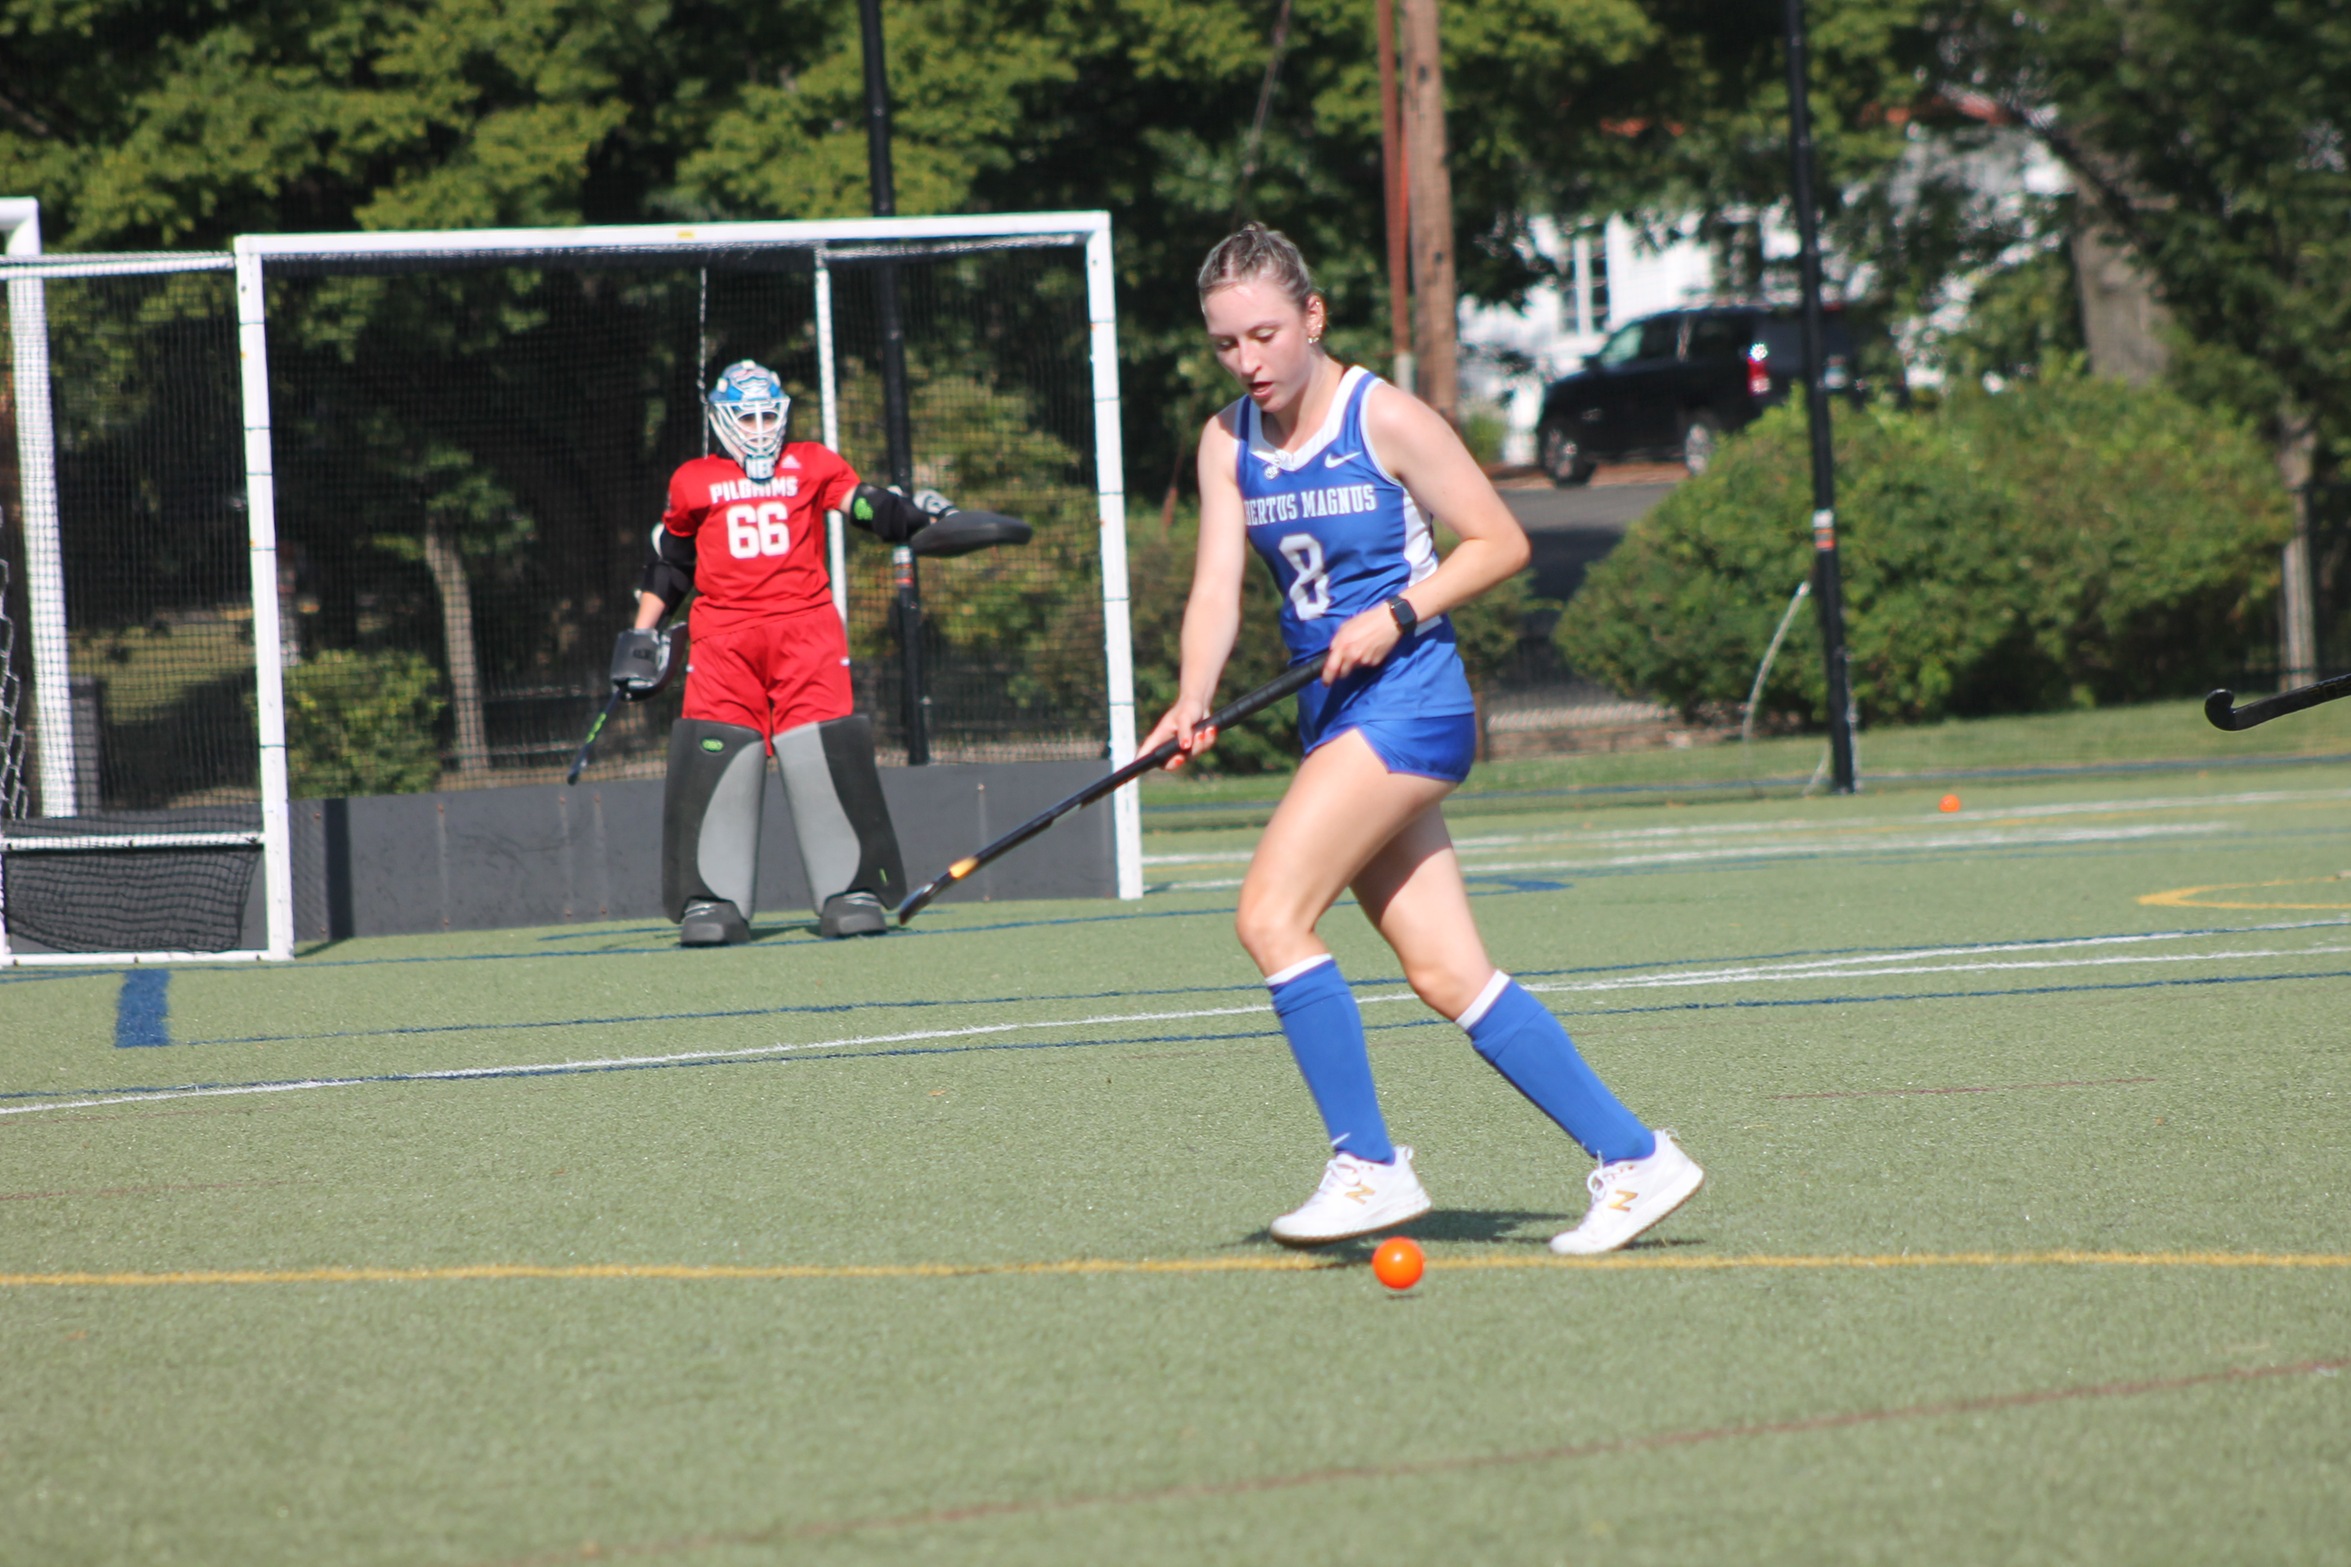 Scheid Scores Early for Field Hockey, Falls 2-1 to Anna Maria